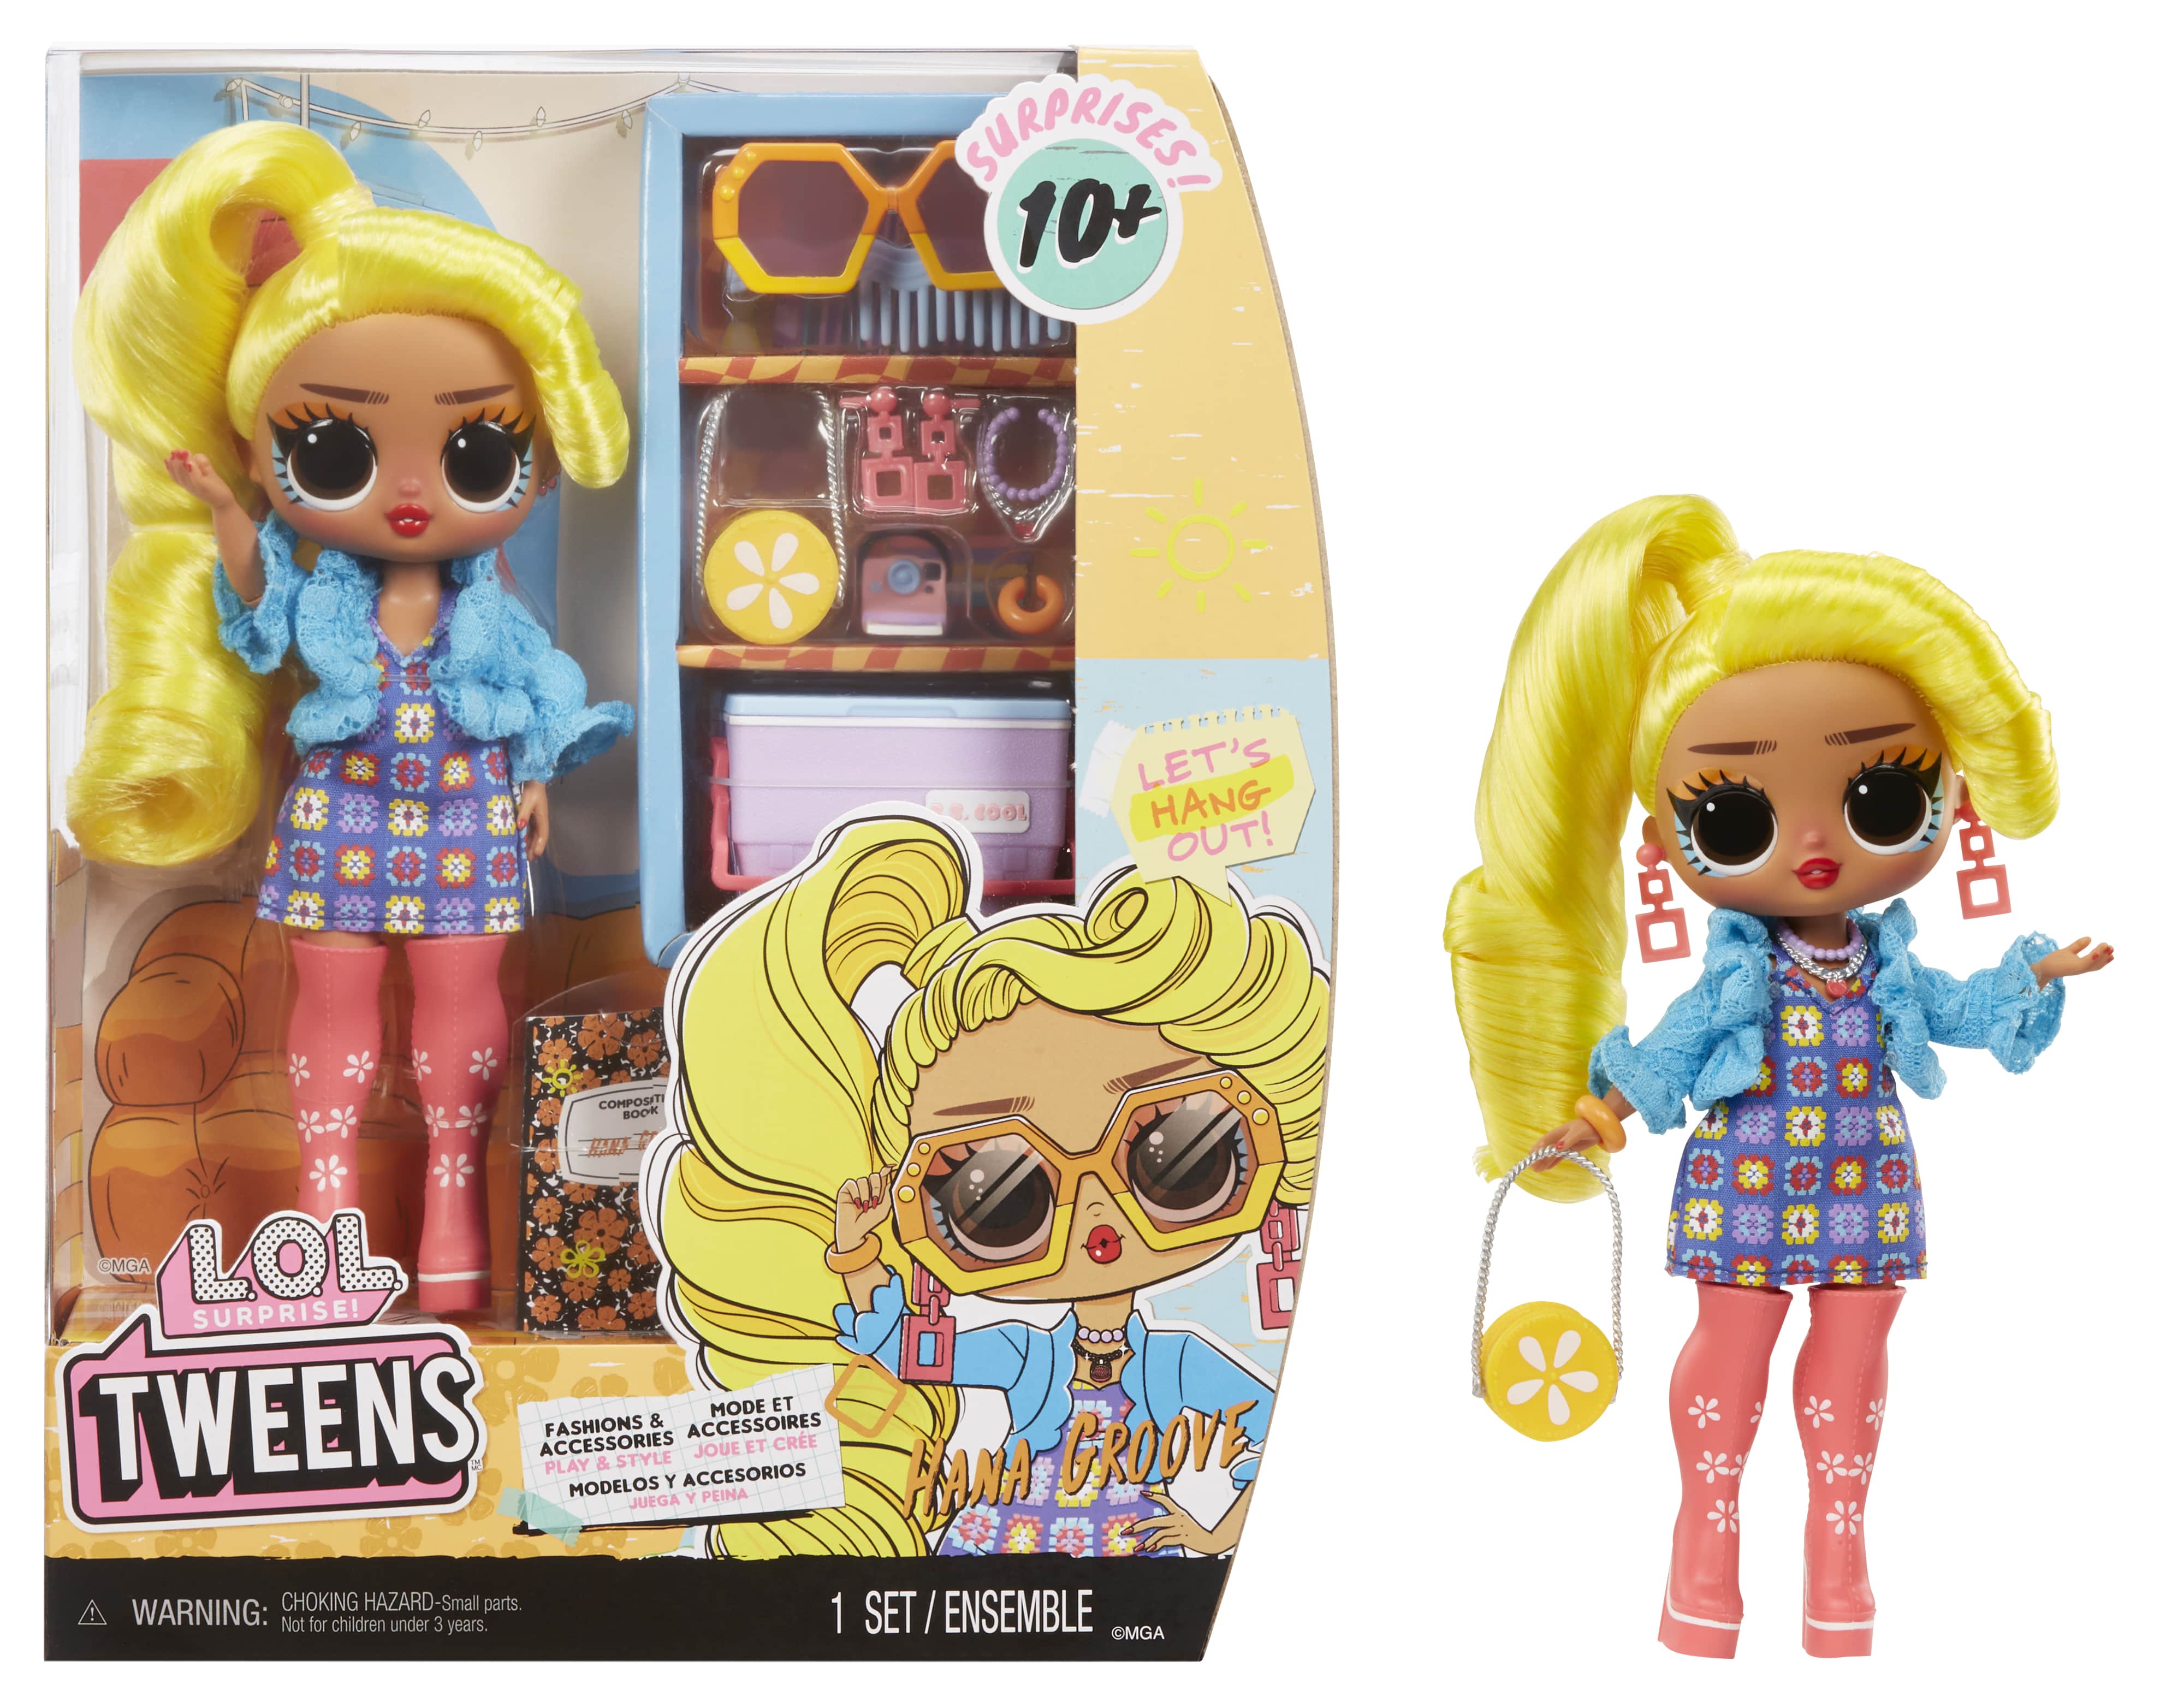 LOL Surprise Tweens Fashion Doll Hana Groove with 10+ Surprises, Great Gift for Kids Ages 4+ - image 1 of 7